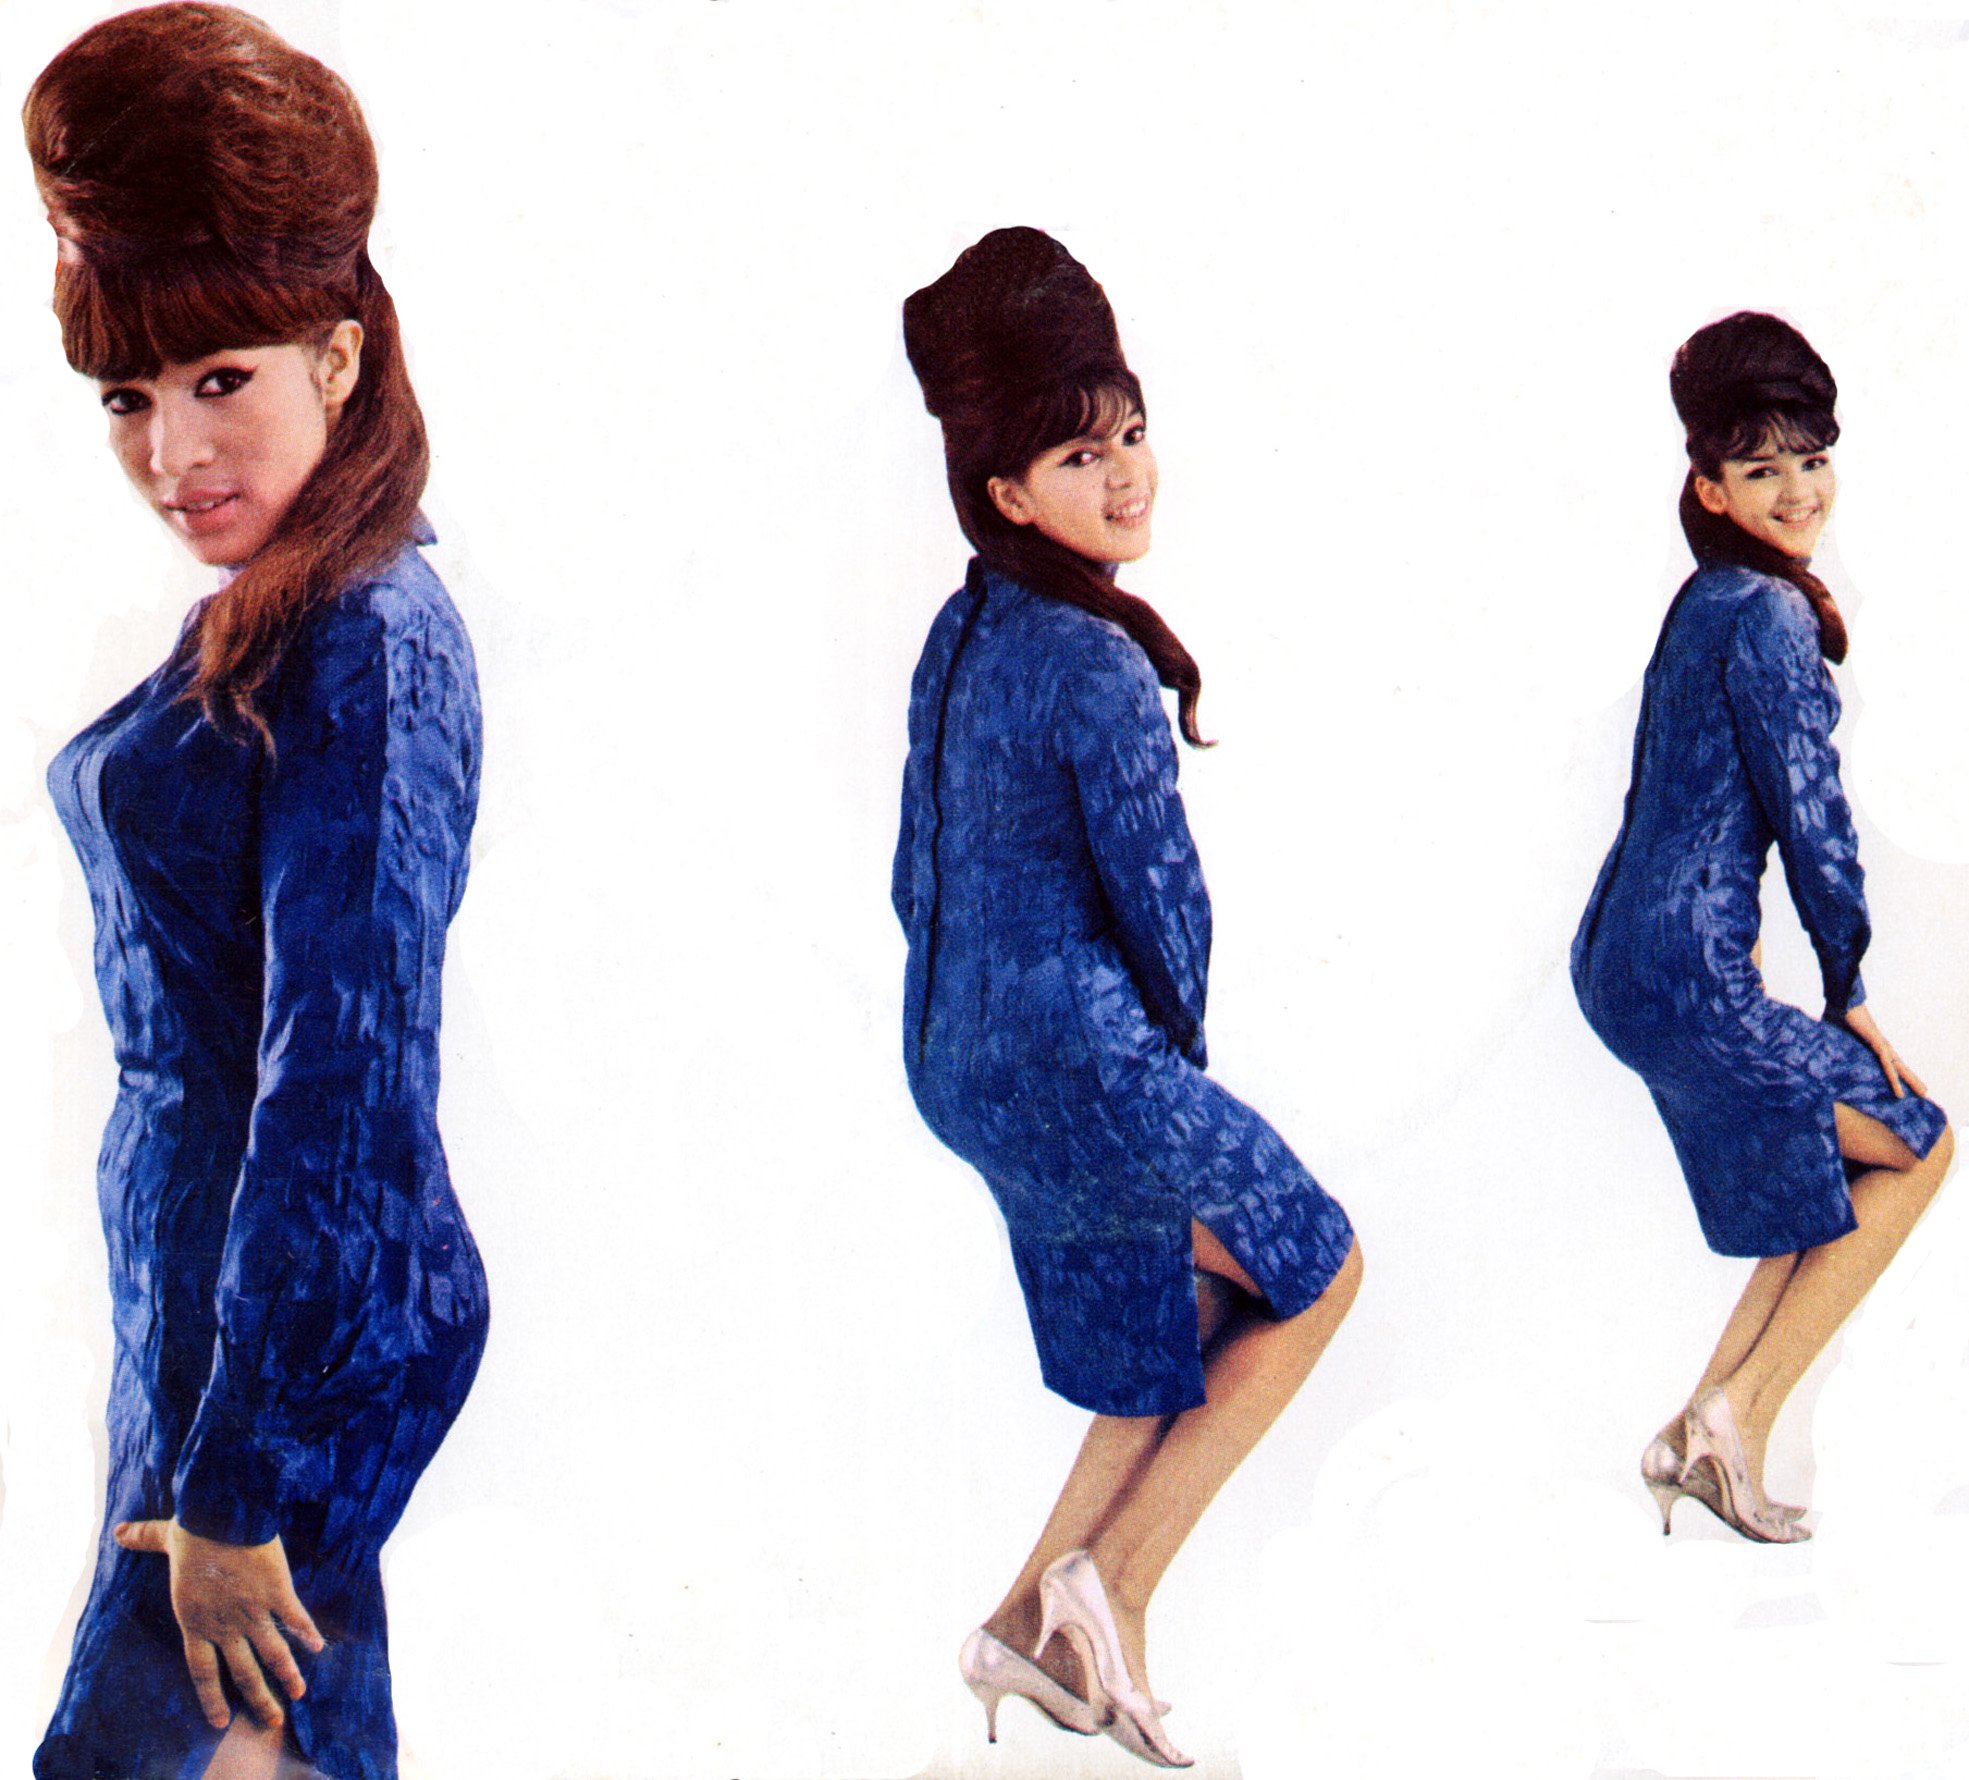 The Ronettes' Ronnie Spector, Estelle Bennett, and Nedra Talley-Ross wearing blue dresses